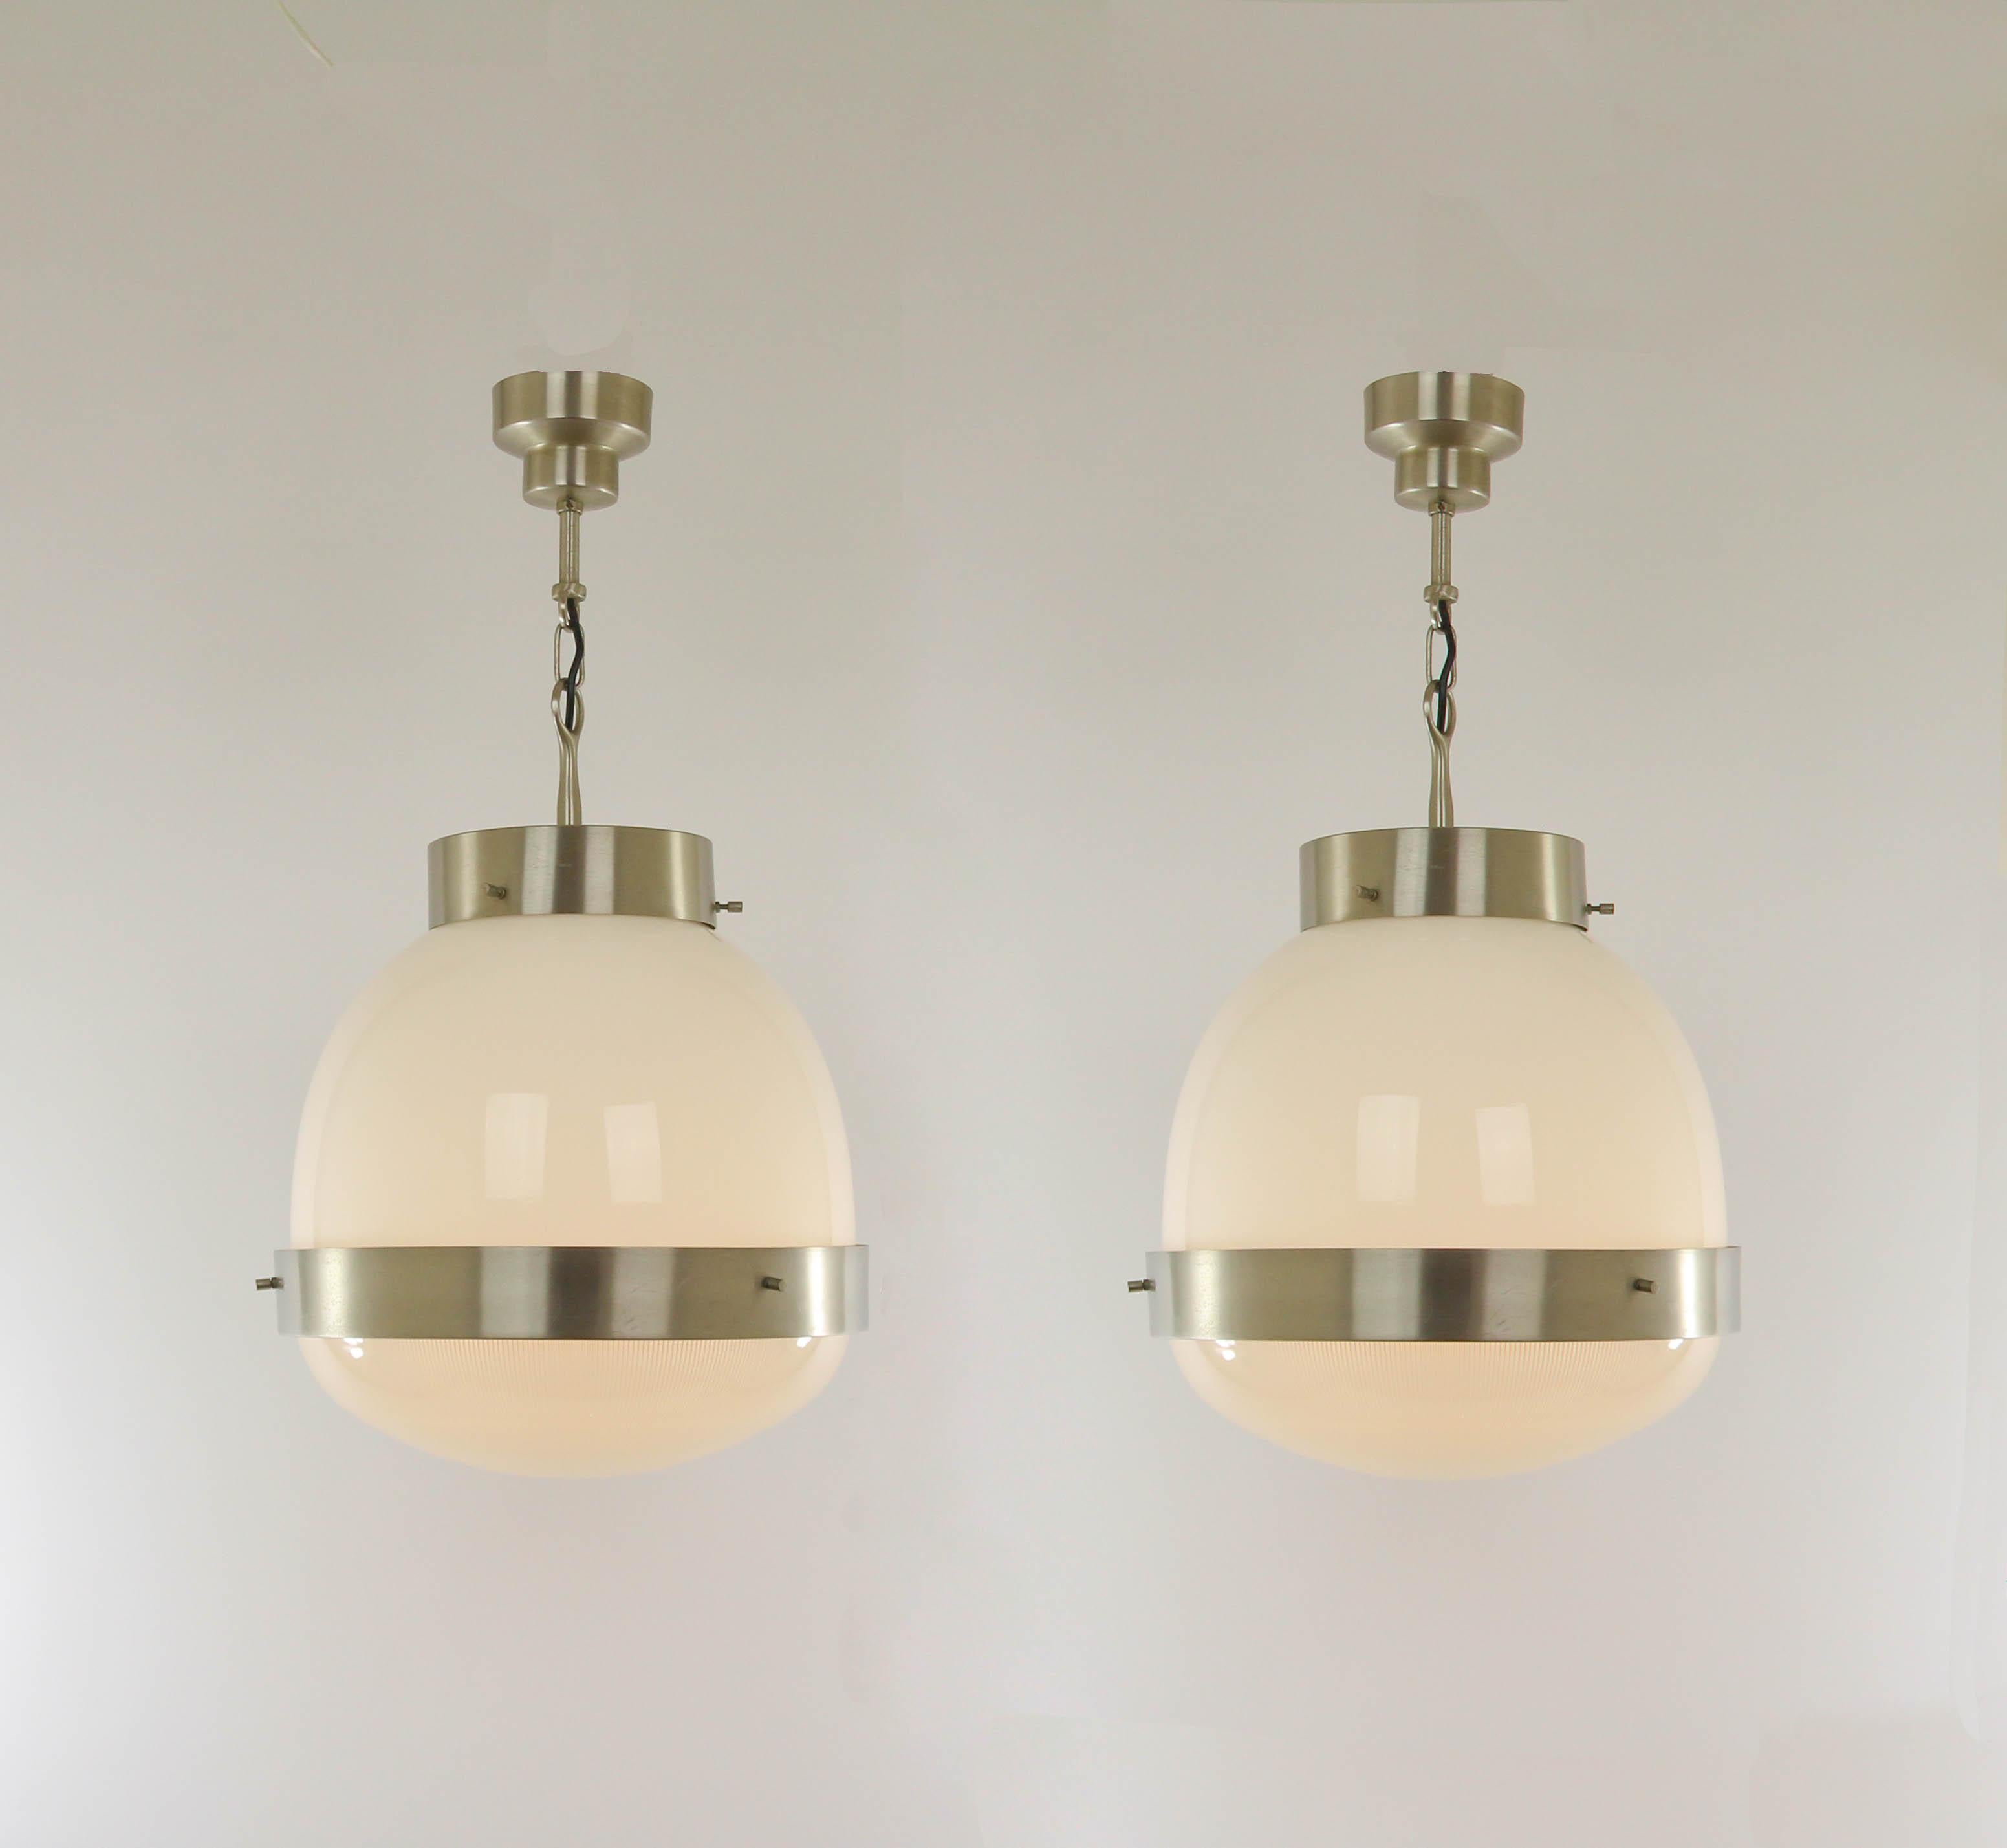 Sergio Mazza designed this Delta Grande pendants for Italian lighting manufacturer Artemide in the 1960s.

The model consists of a pressed crystal bowl and an opaline shade. The structure is from matt nickel-plated brass.

The condition of these